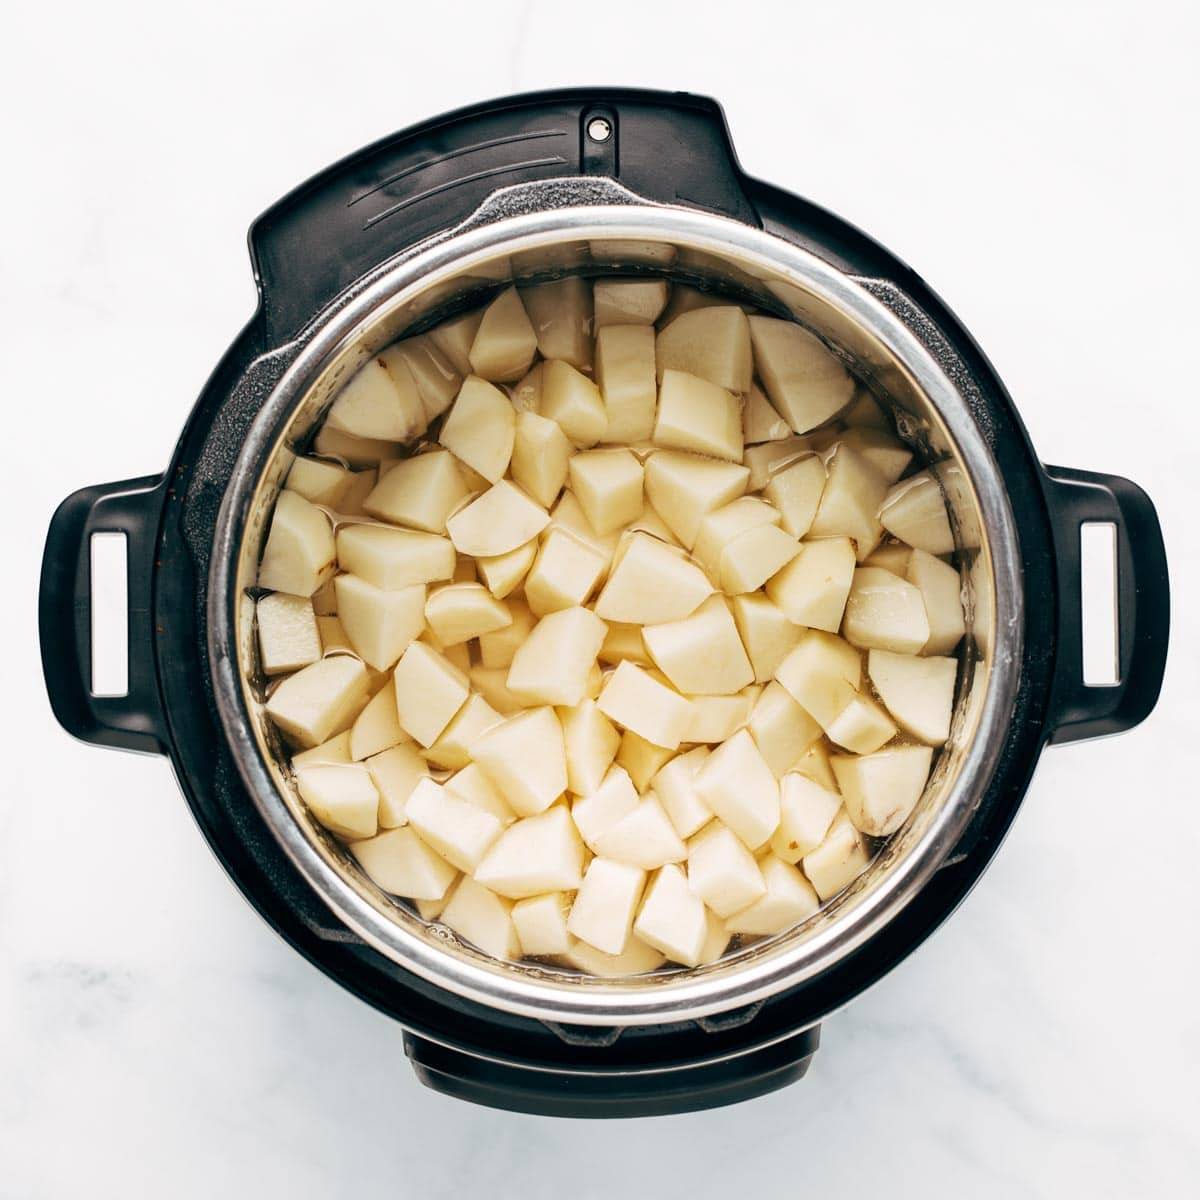 Raw cut potatoes in the Instant Pot.